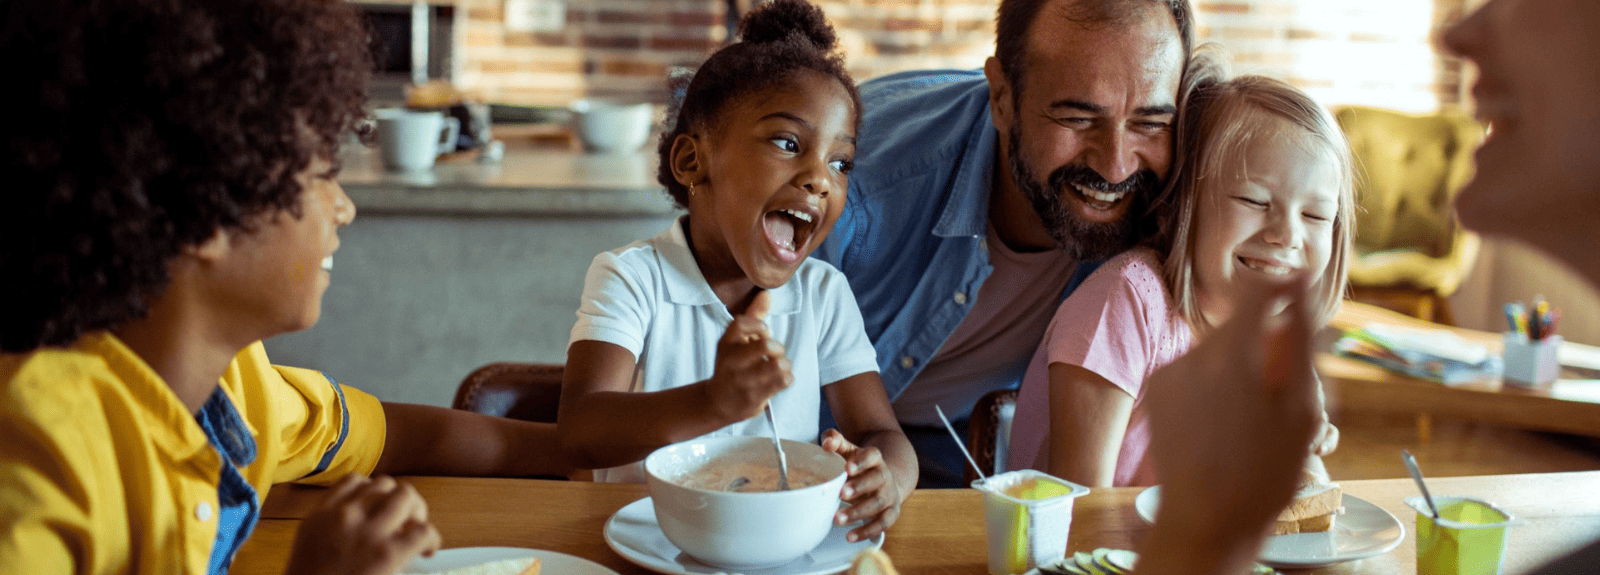 Kids and a man laughing while eating cereal